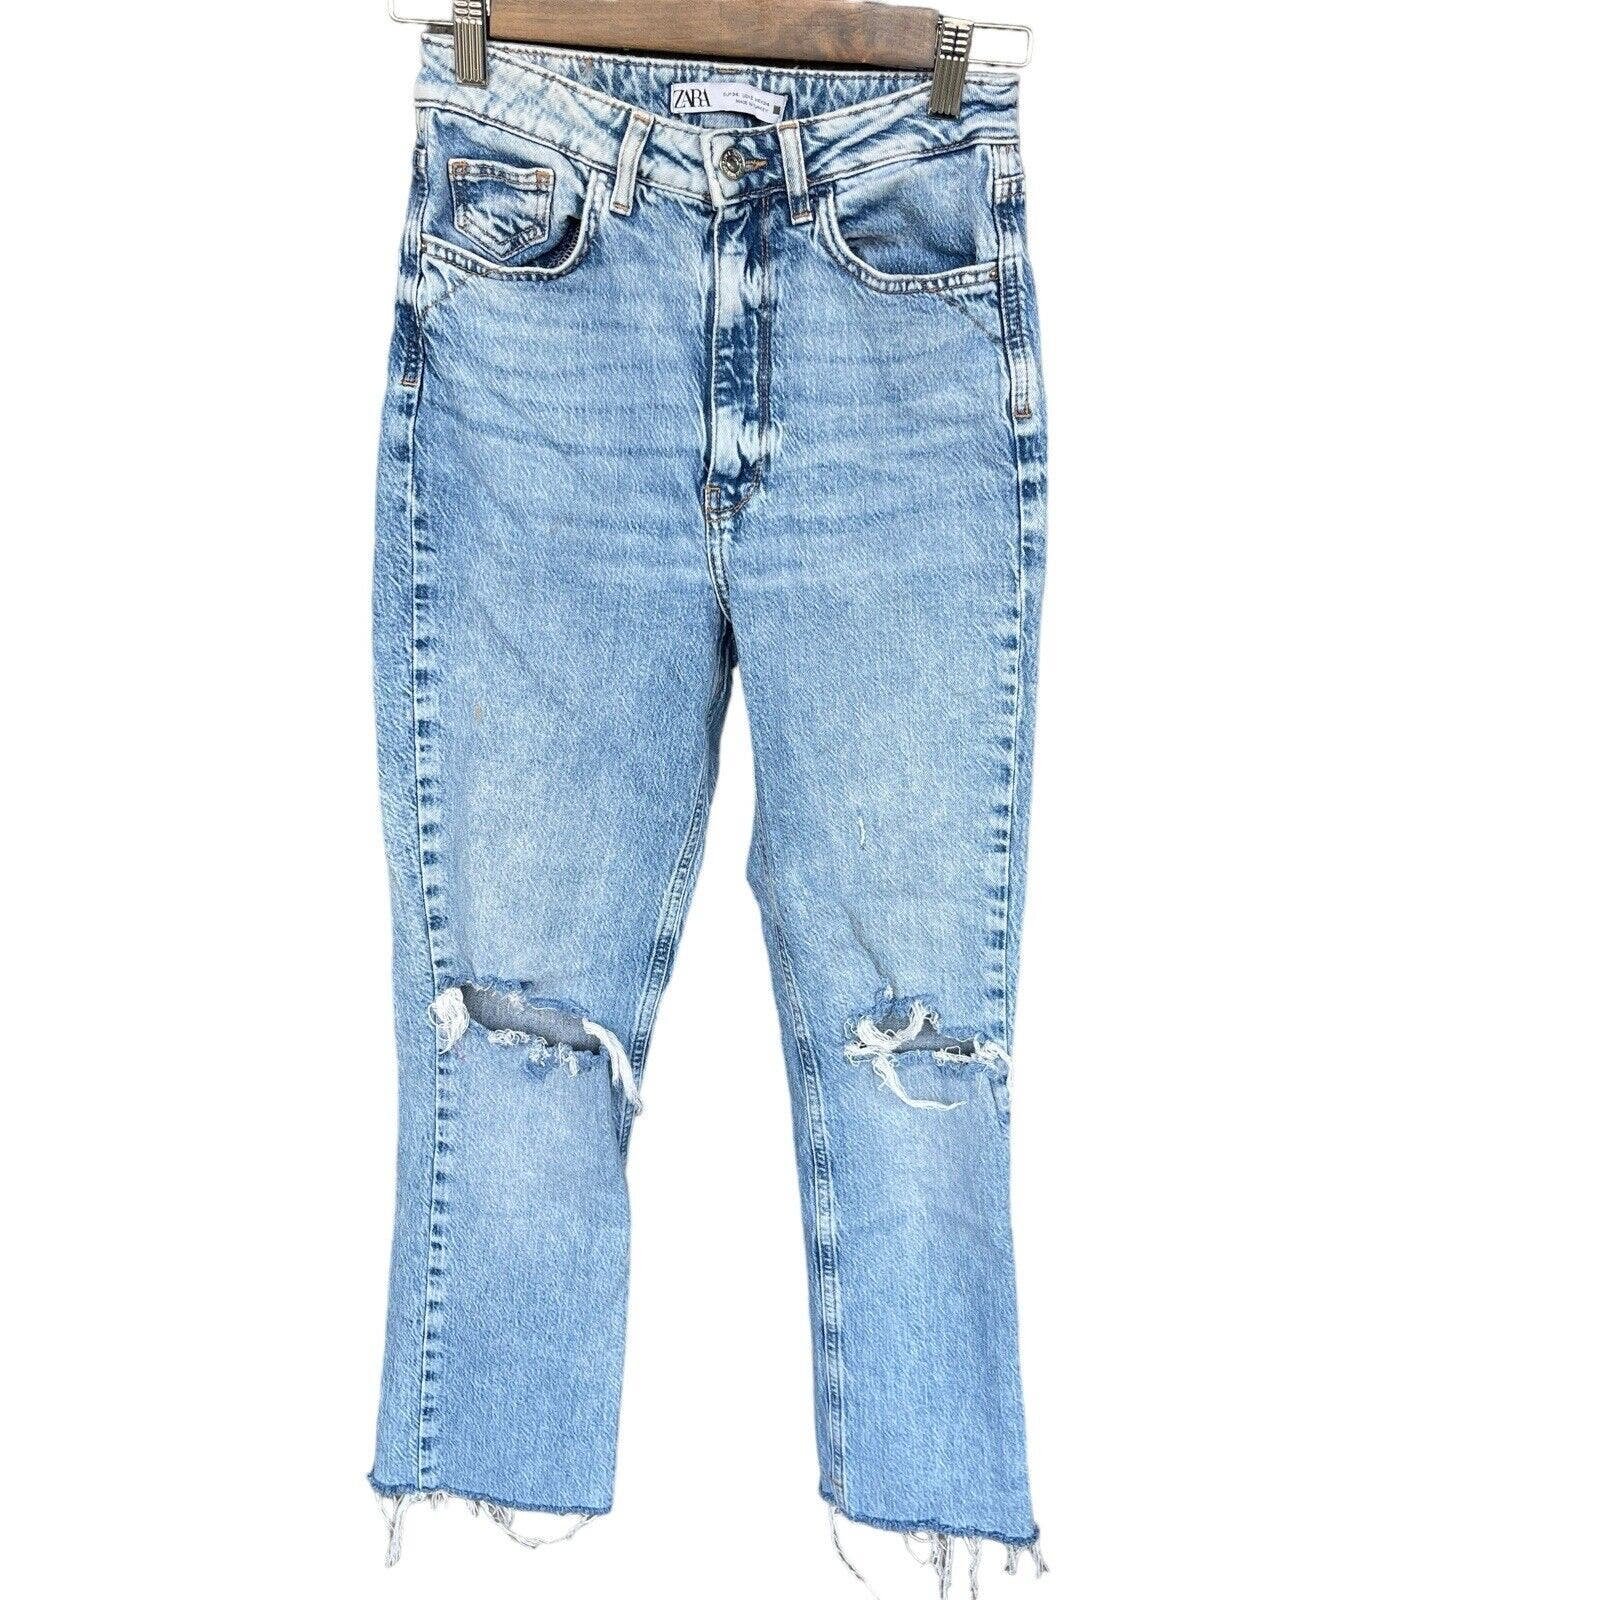 cheapest place to buy  Zara Jeans Womens Size 2 Blue Sl